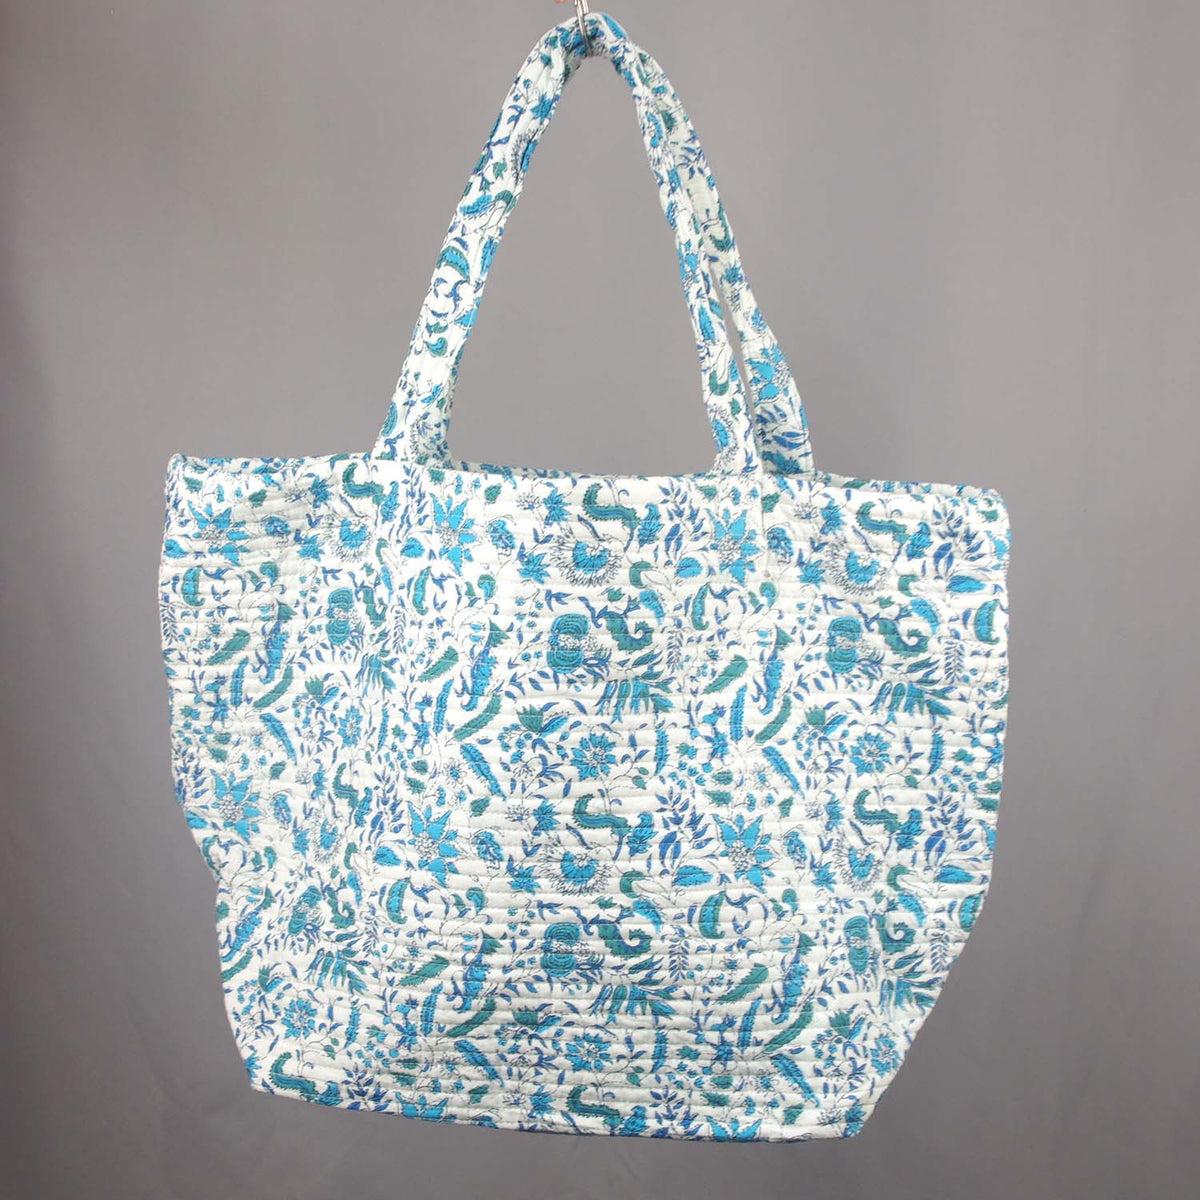 Cotton Quilted Large Shoppping / Beach Bag - White Blue Floral Print